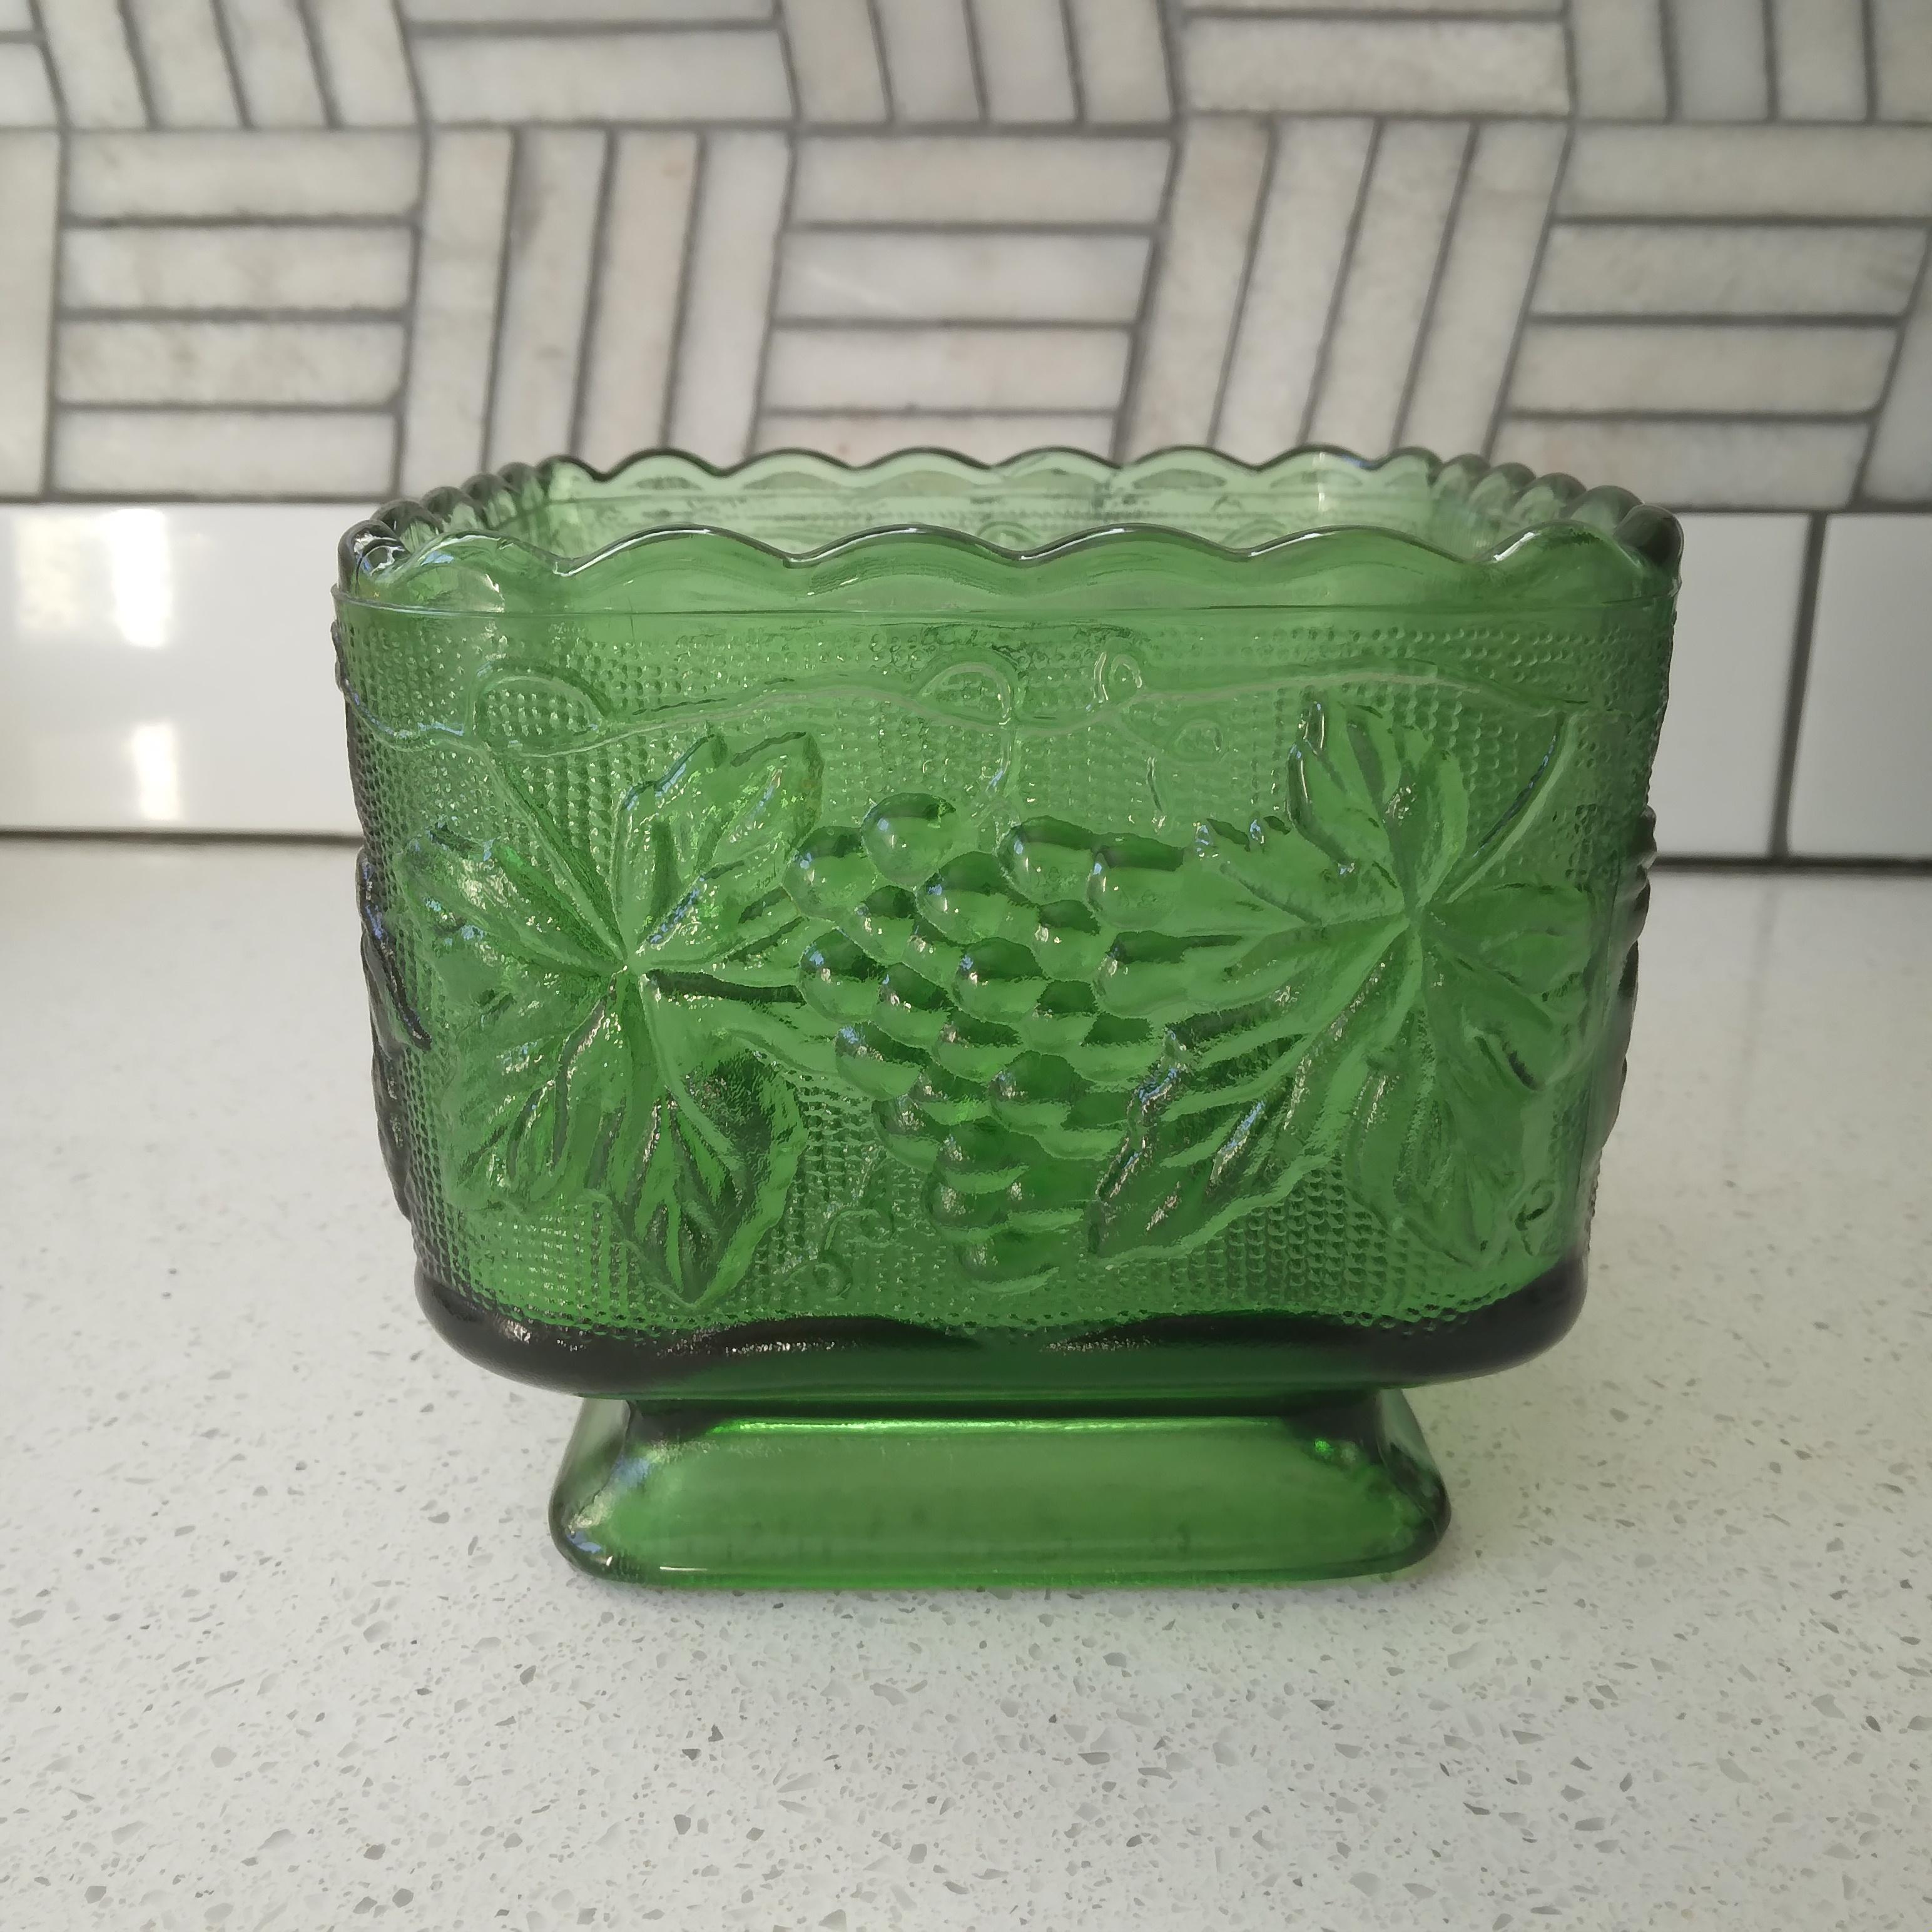 Sturdy and beautiful, we love the vibrant green tones of this vintage bowl. 

This glass piece features an beautiful grapvine design with a scalloped top edge and small footed pedestal. The bold bottle coloring and thick walled glass make this a